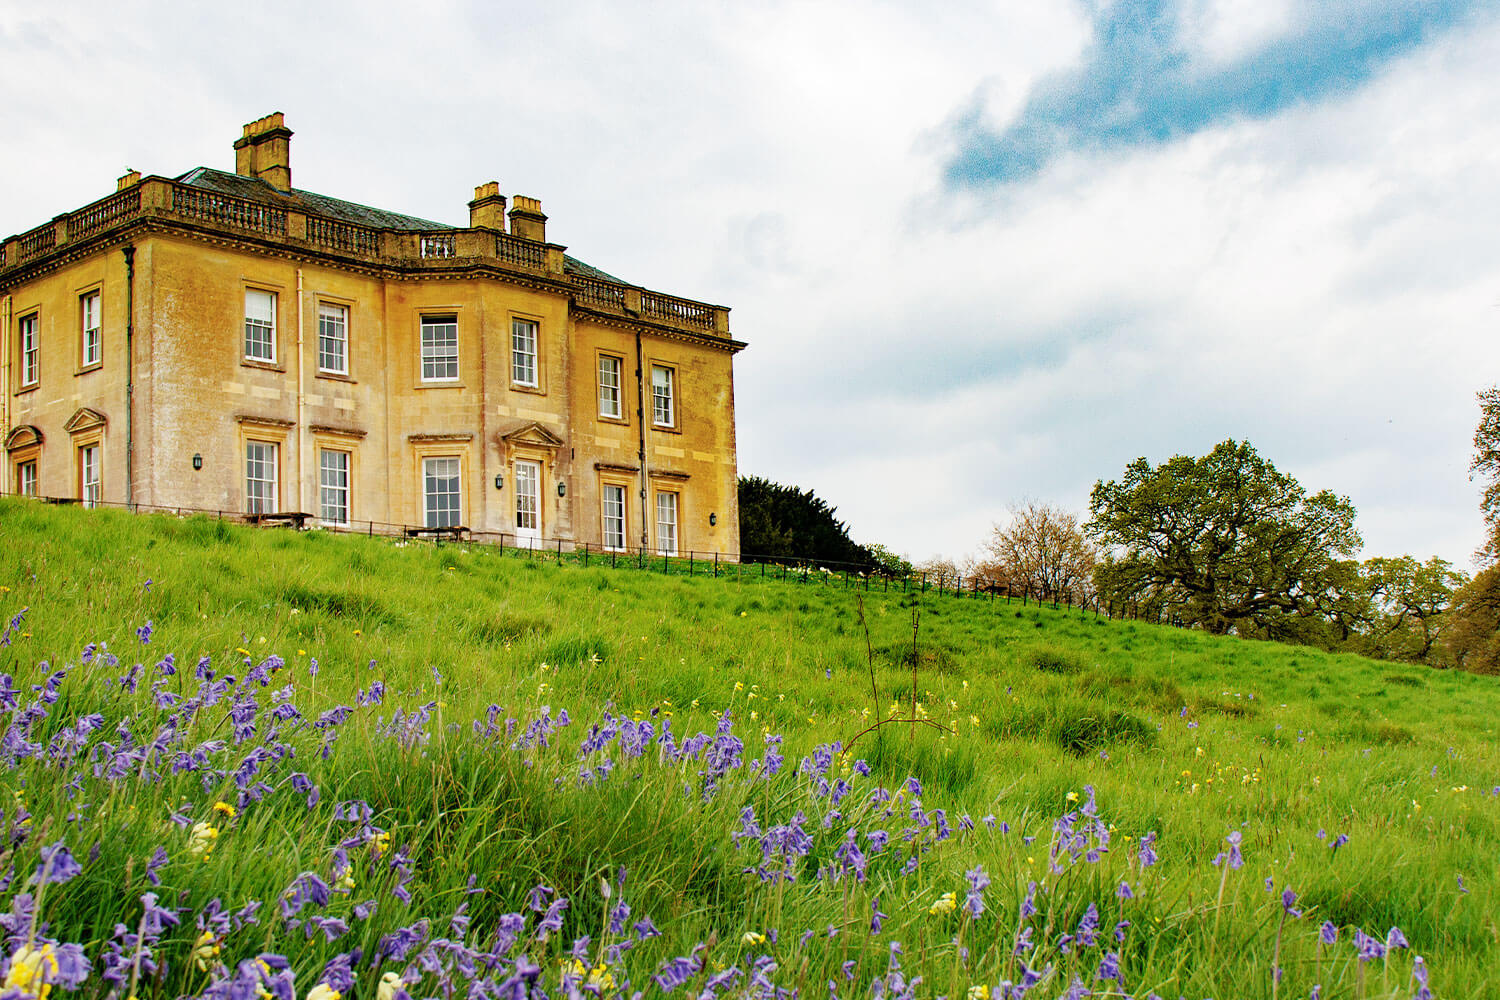 Eighteenth century building nestled in a field of spring flowers